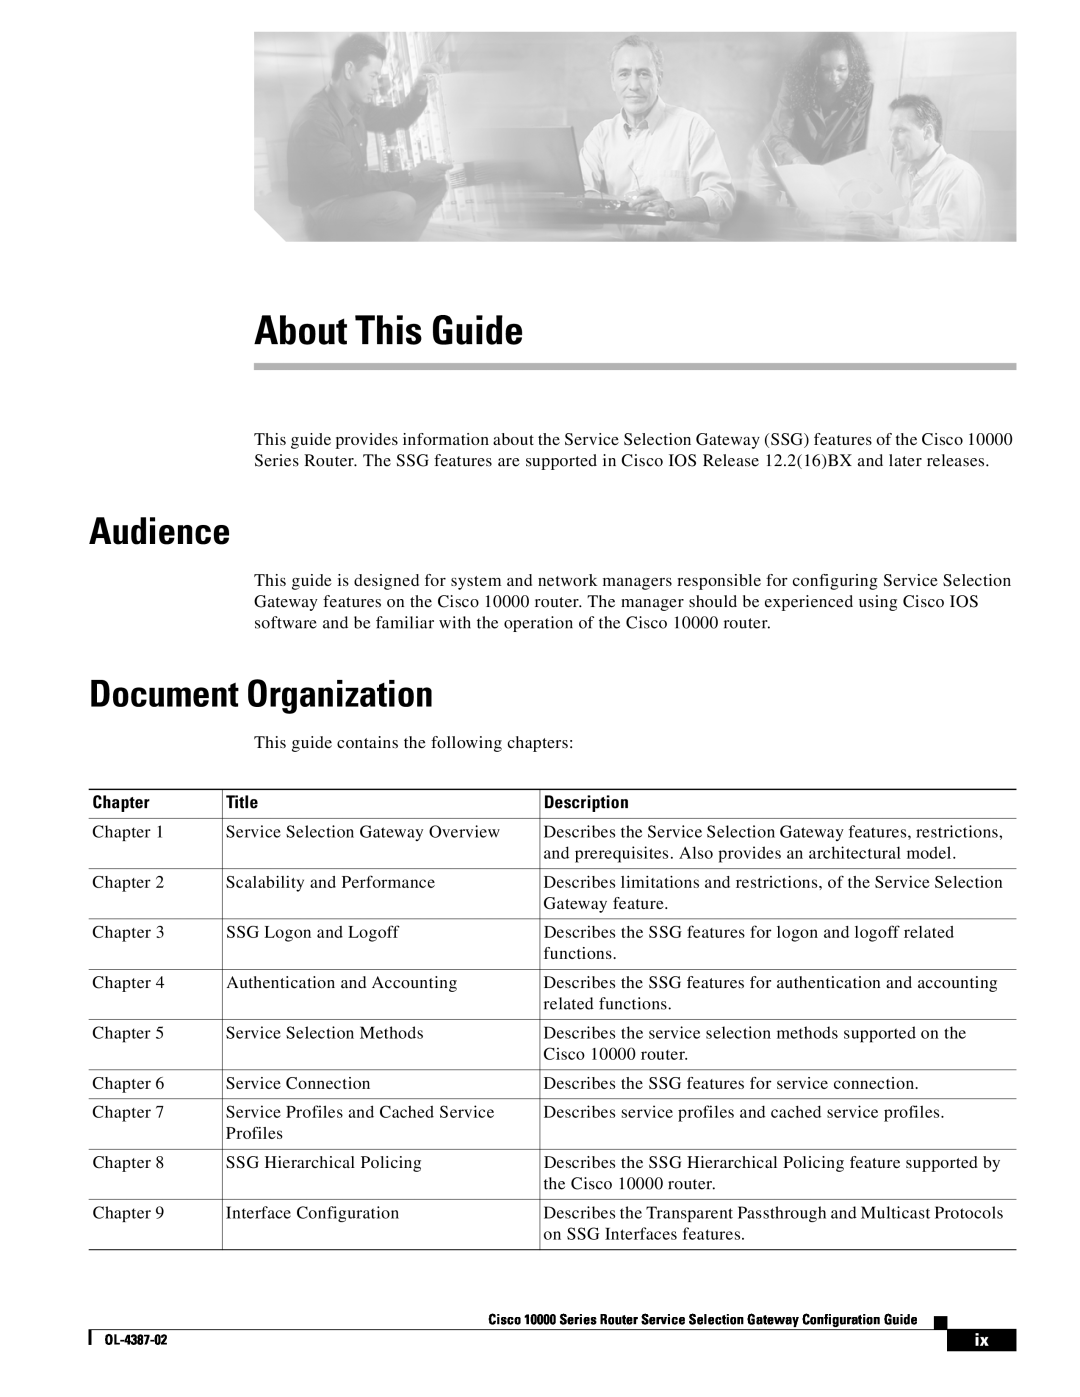 Cisco Systems OL-4387-02 manual About This Guide, Audience, Document Organization, Chapter, Title, Description 